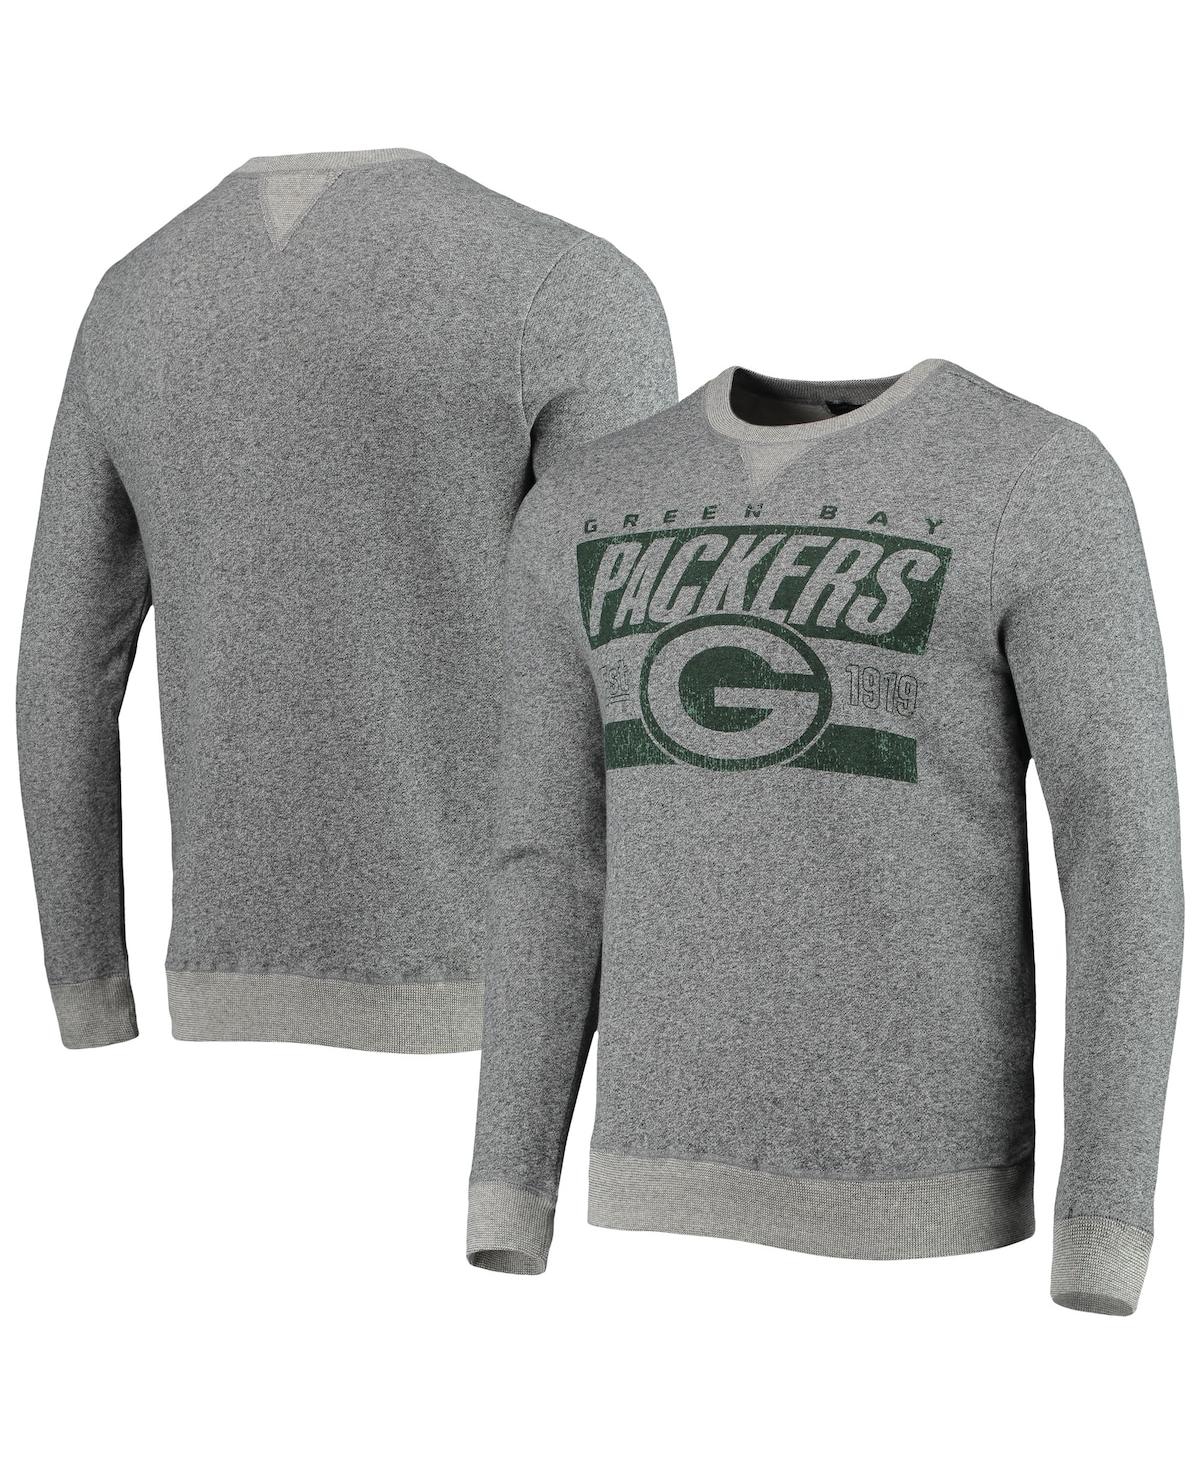 Men's Junk Food Heathered Charcoal Green Bay Packers Team Marled Pullover Sweatshirt - Heathered Charcoal